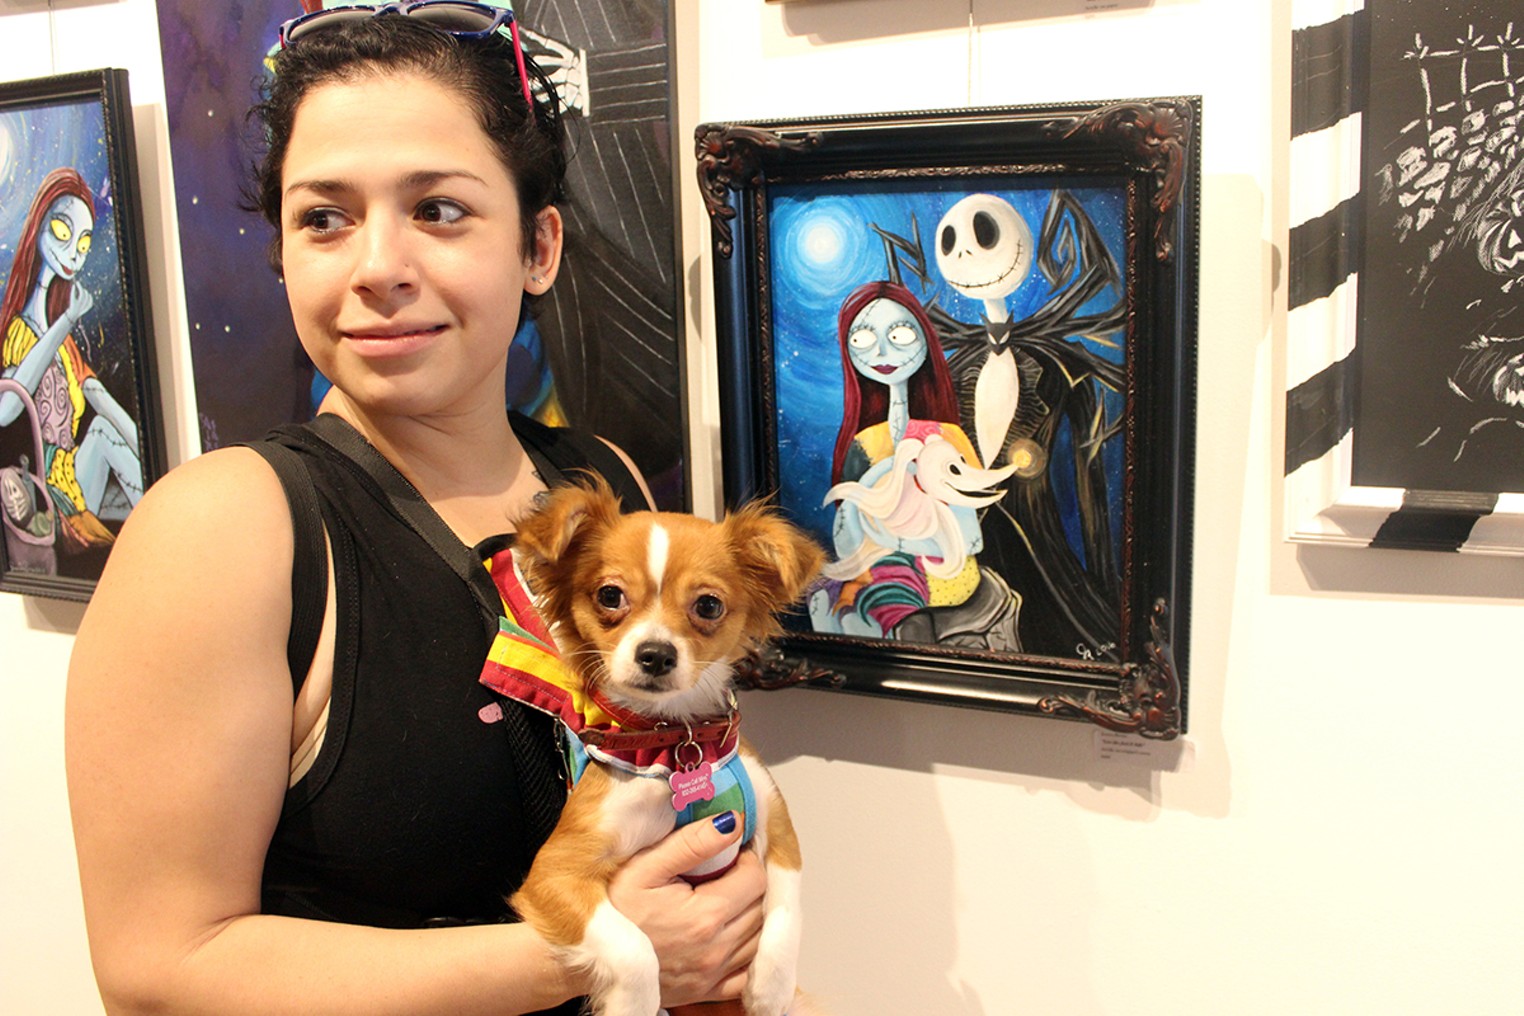 Mening nødvendighed by East End Studio Gallery's Wacky Tim Burton-Themed Art Show | Houston |  Houston Press | The Leading Independent News Source in Houston, Texas